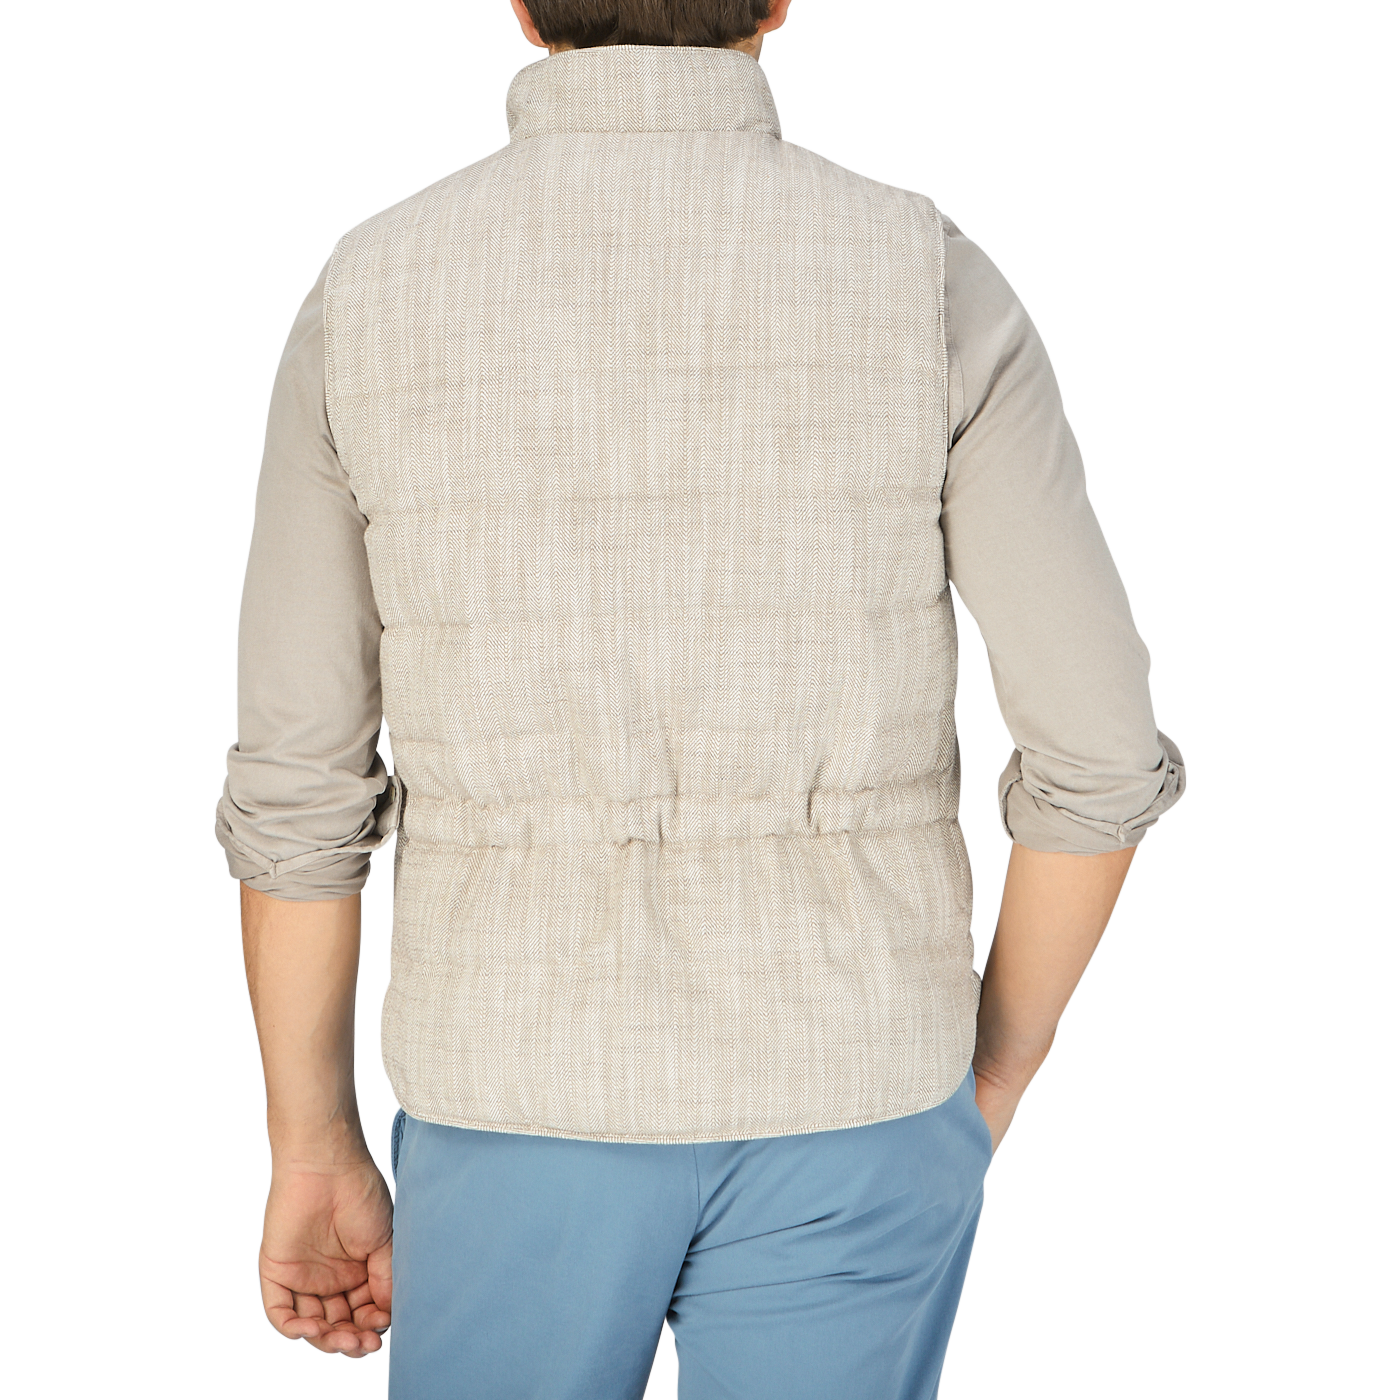 The back view of a man wearing a Beige Herringbone Cotton Linen Down Padded Gilet, a layering piece from Stenströms.